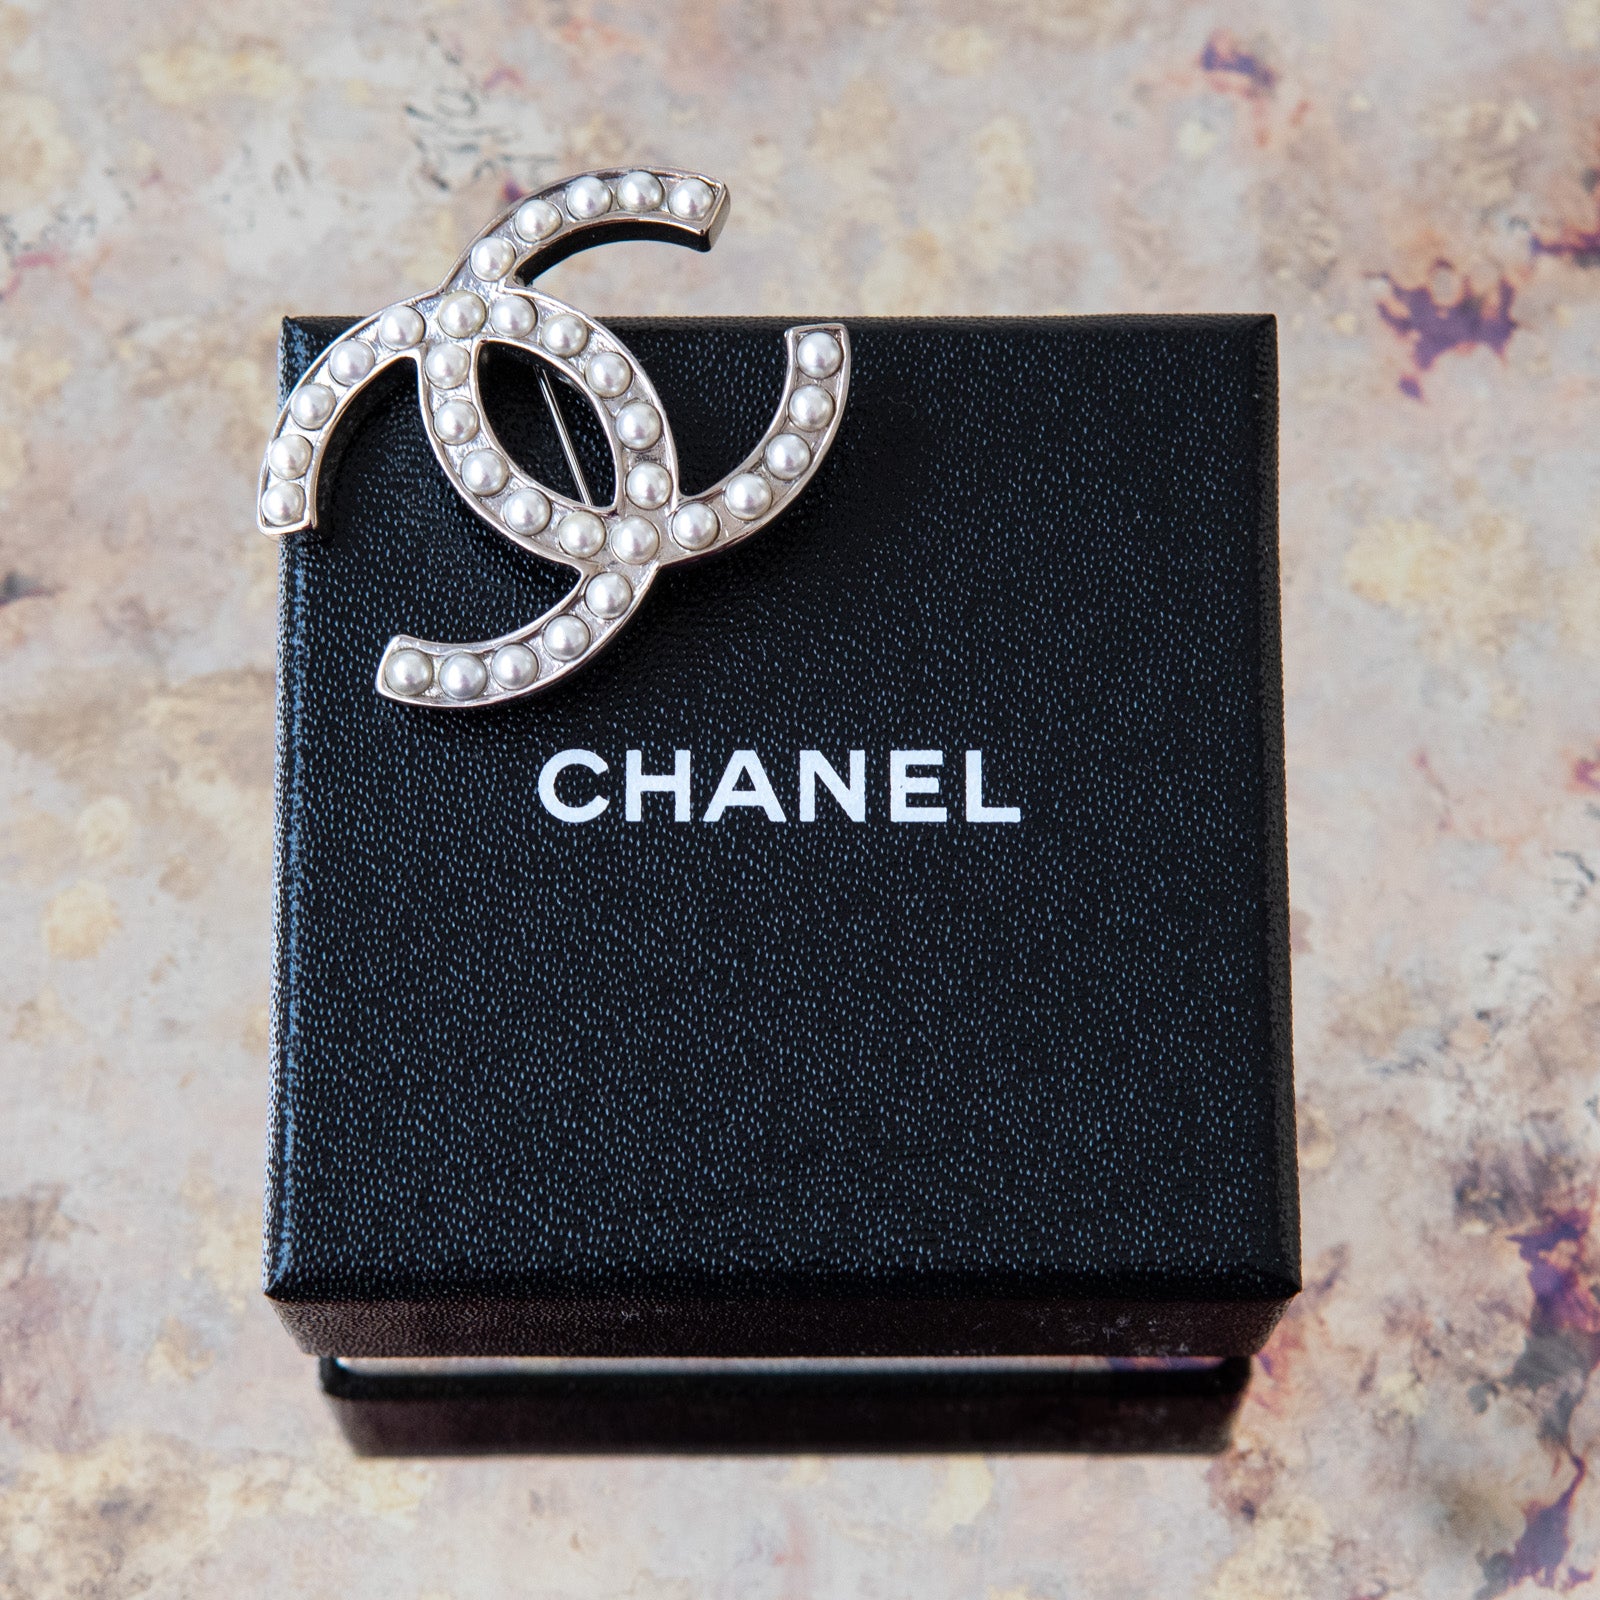 Chanel Faux Pearl Brooch - Image 4 of 5